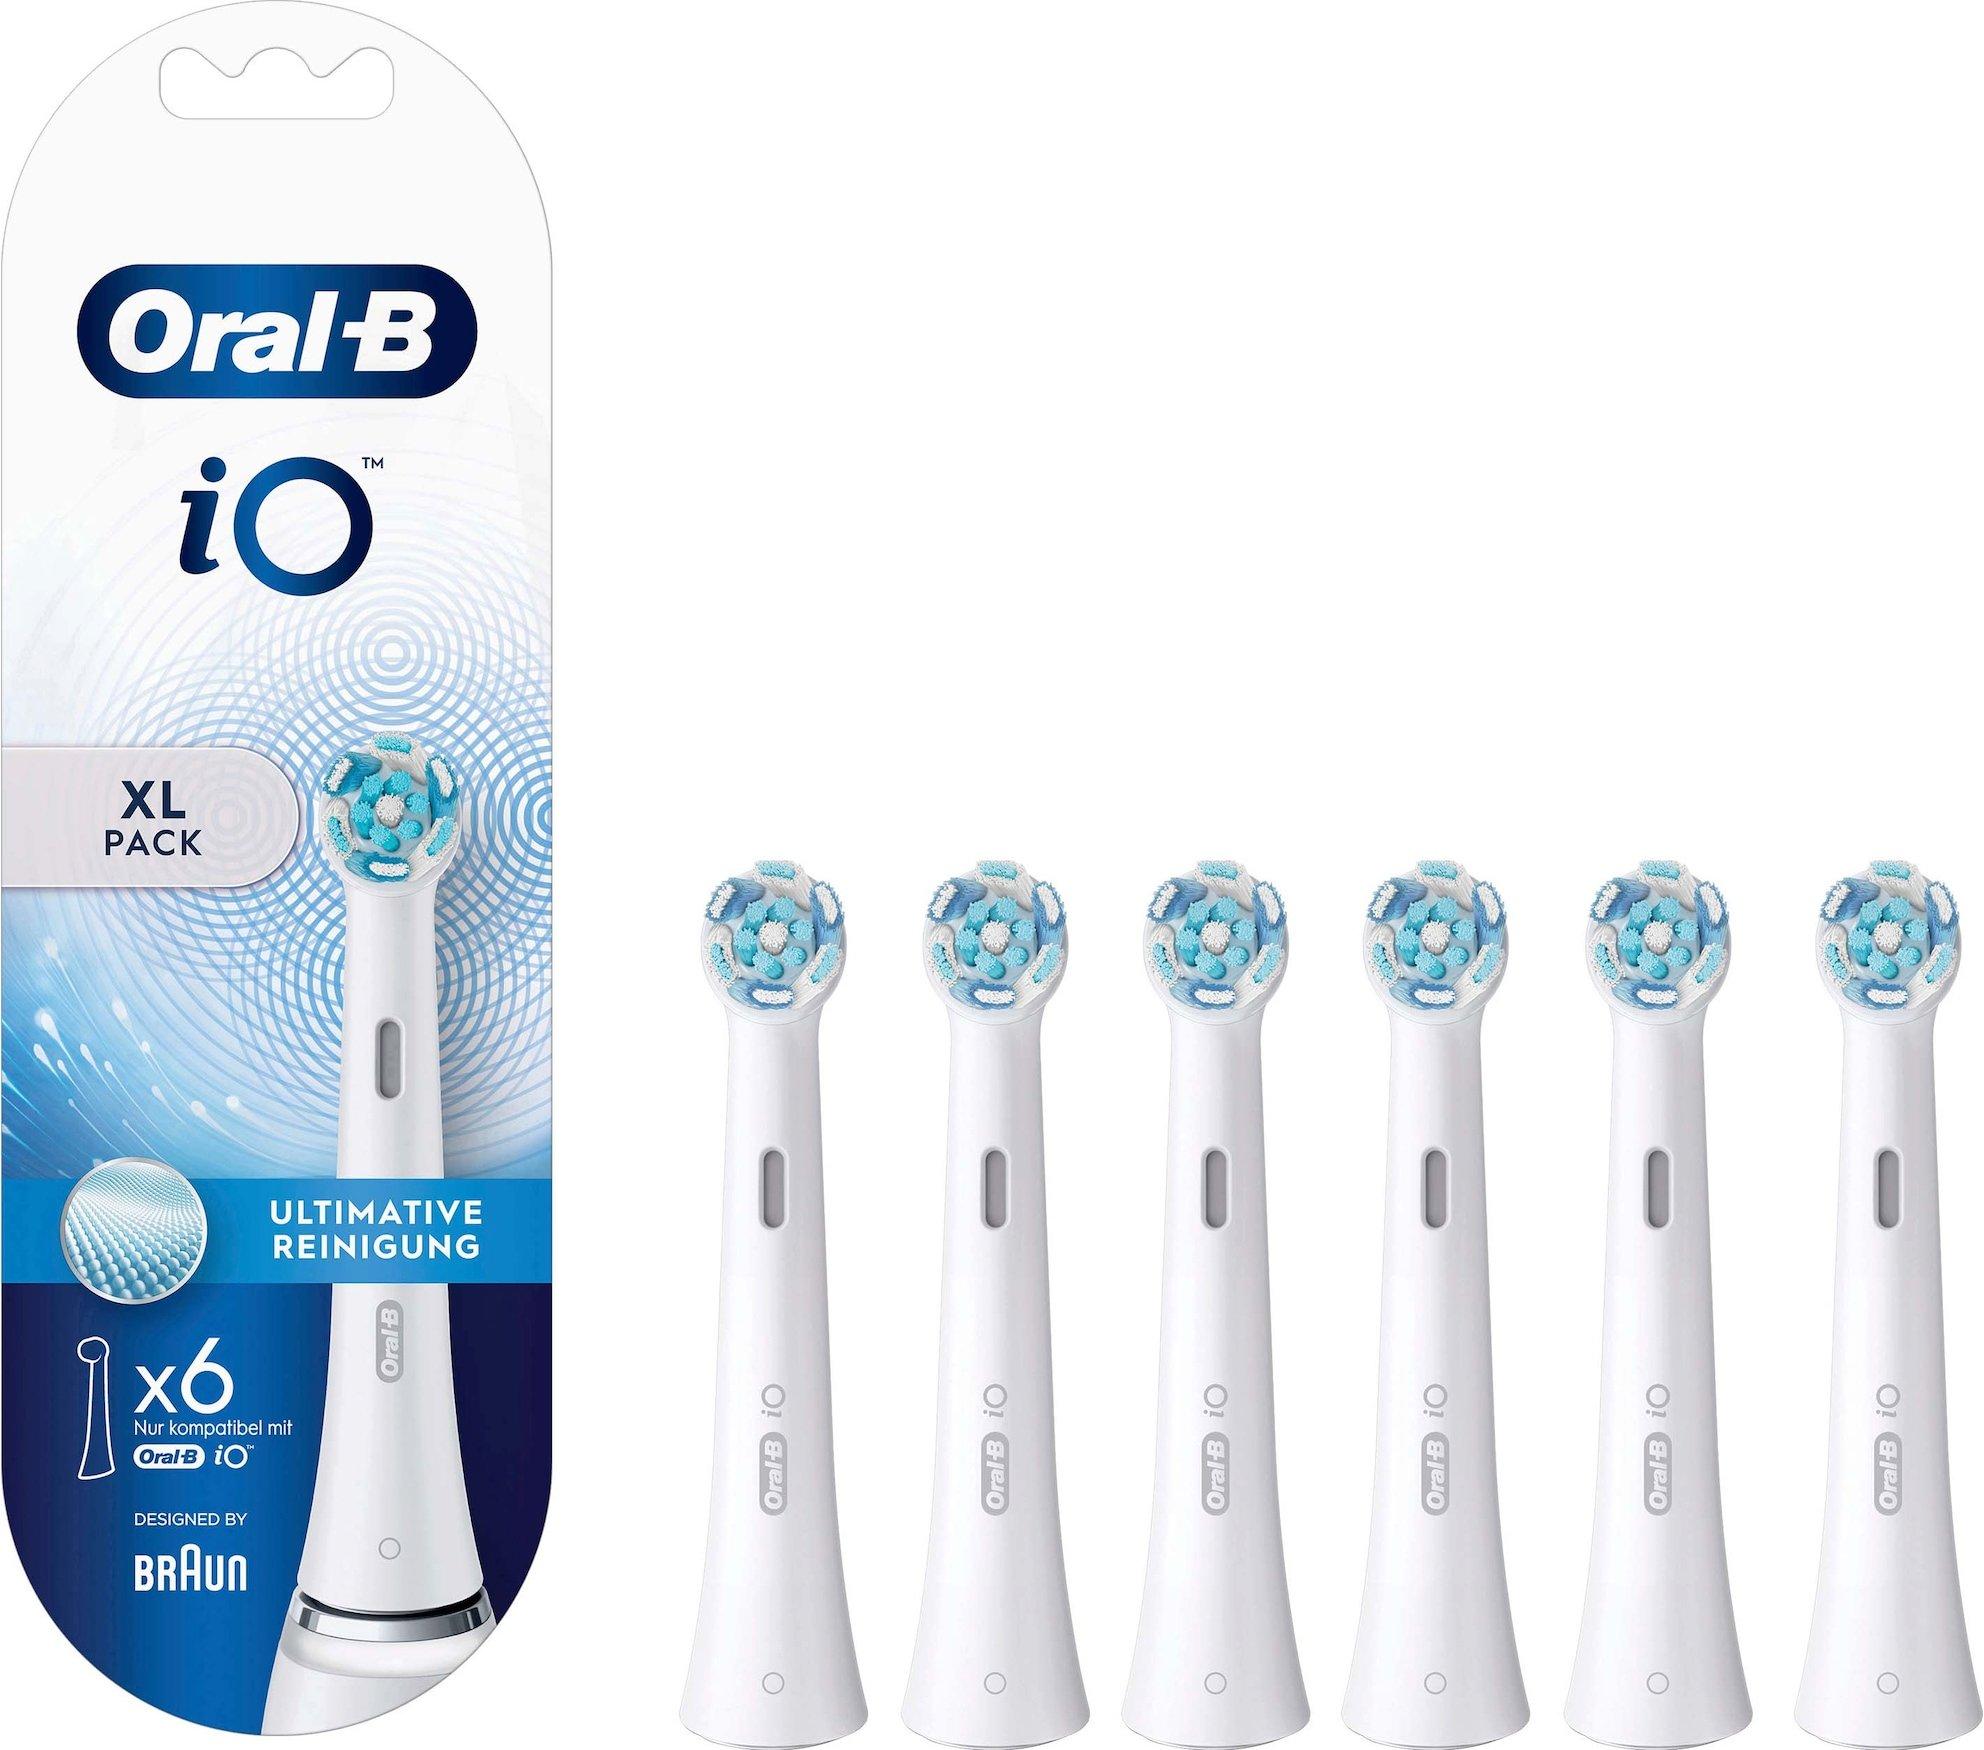 Oral-B iO  Embout brosse iO Nettoyage ultime 6 pcs 